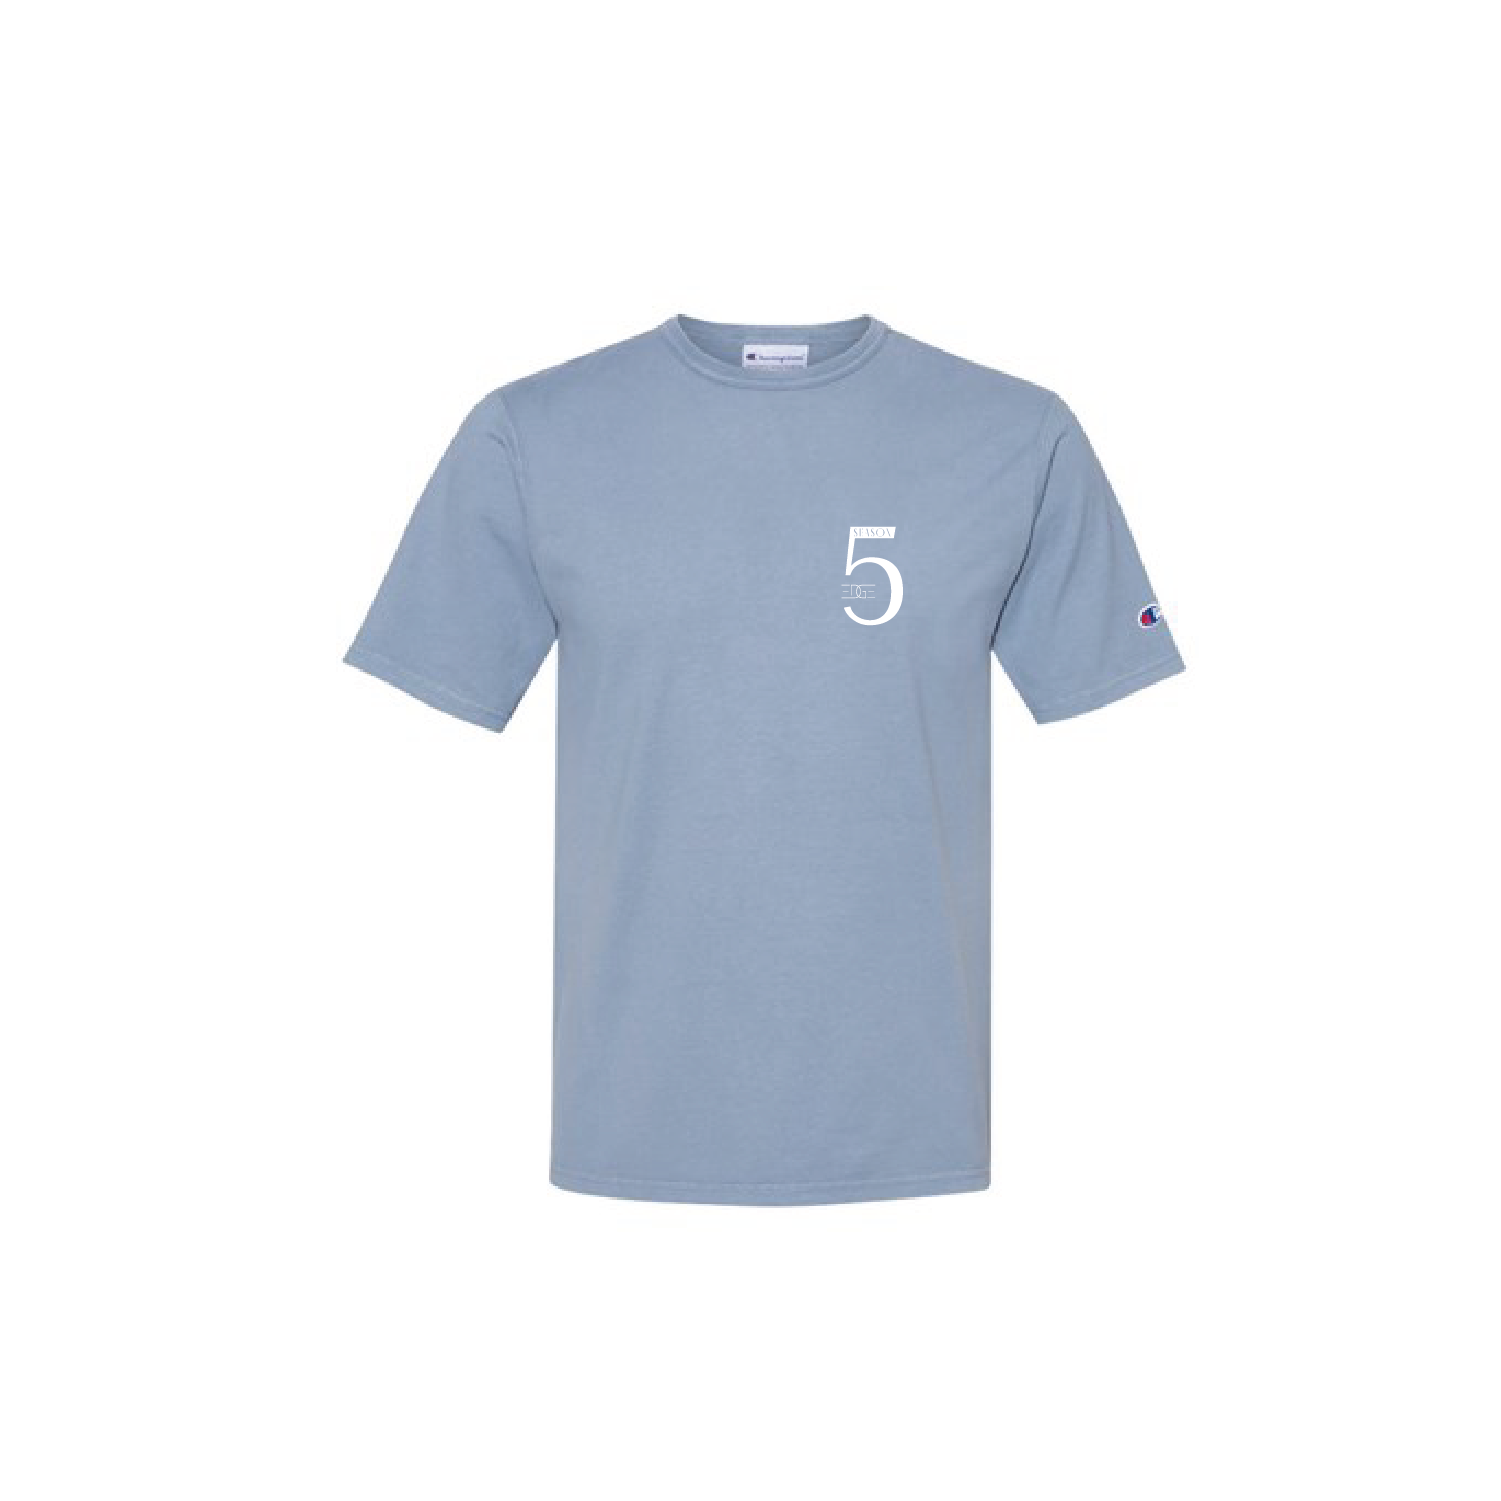 slate blue t-shirt that has the same graphic as on the grey sweatpants